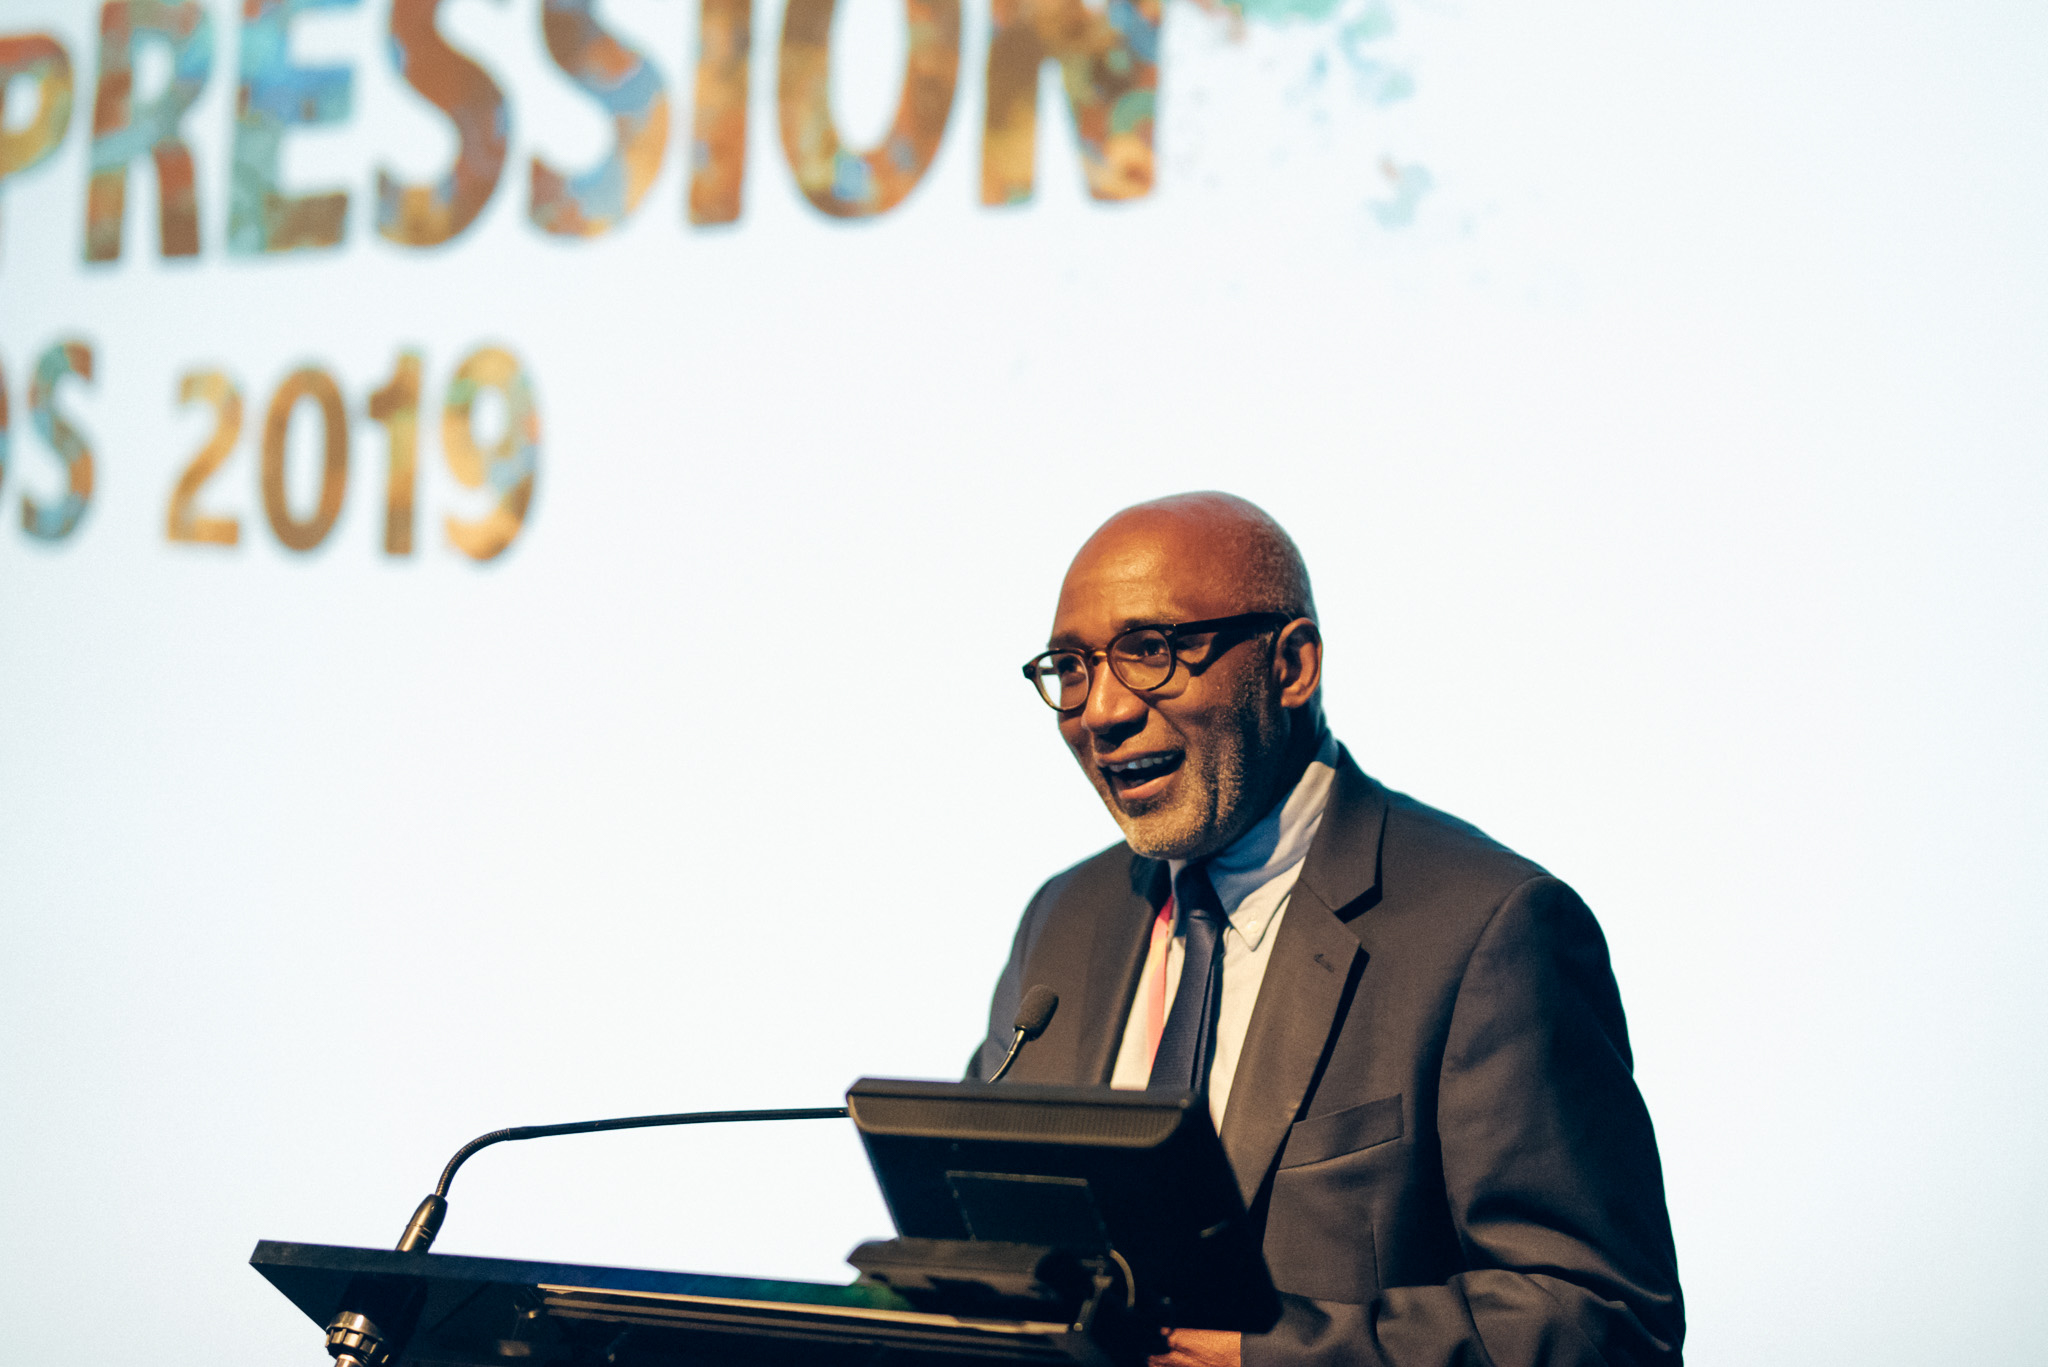 Trevor Phillips, chair of Index on Censorship, at the 2019 Freedom of Expression Awards (Photo: Elina Kansikas for Index on Censorship)